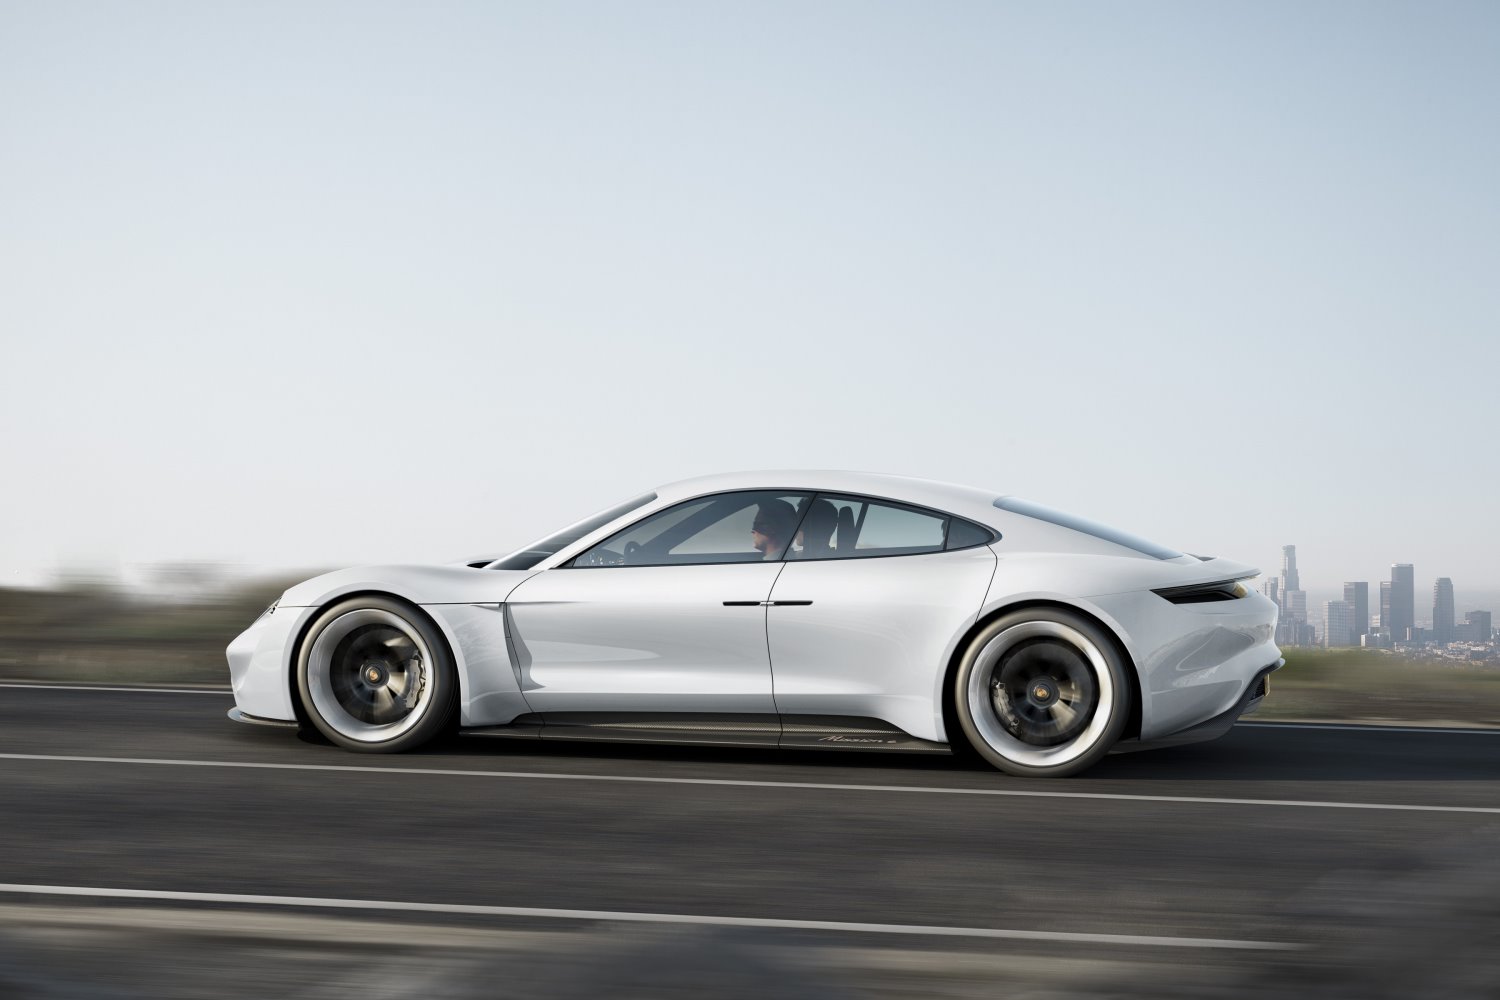 The Porsche Mission E will be an all-electric supercar